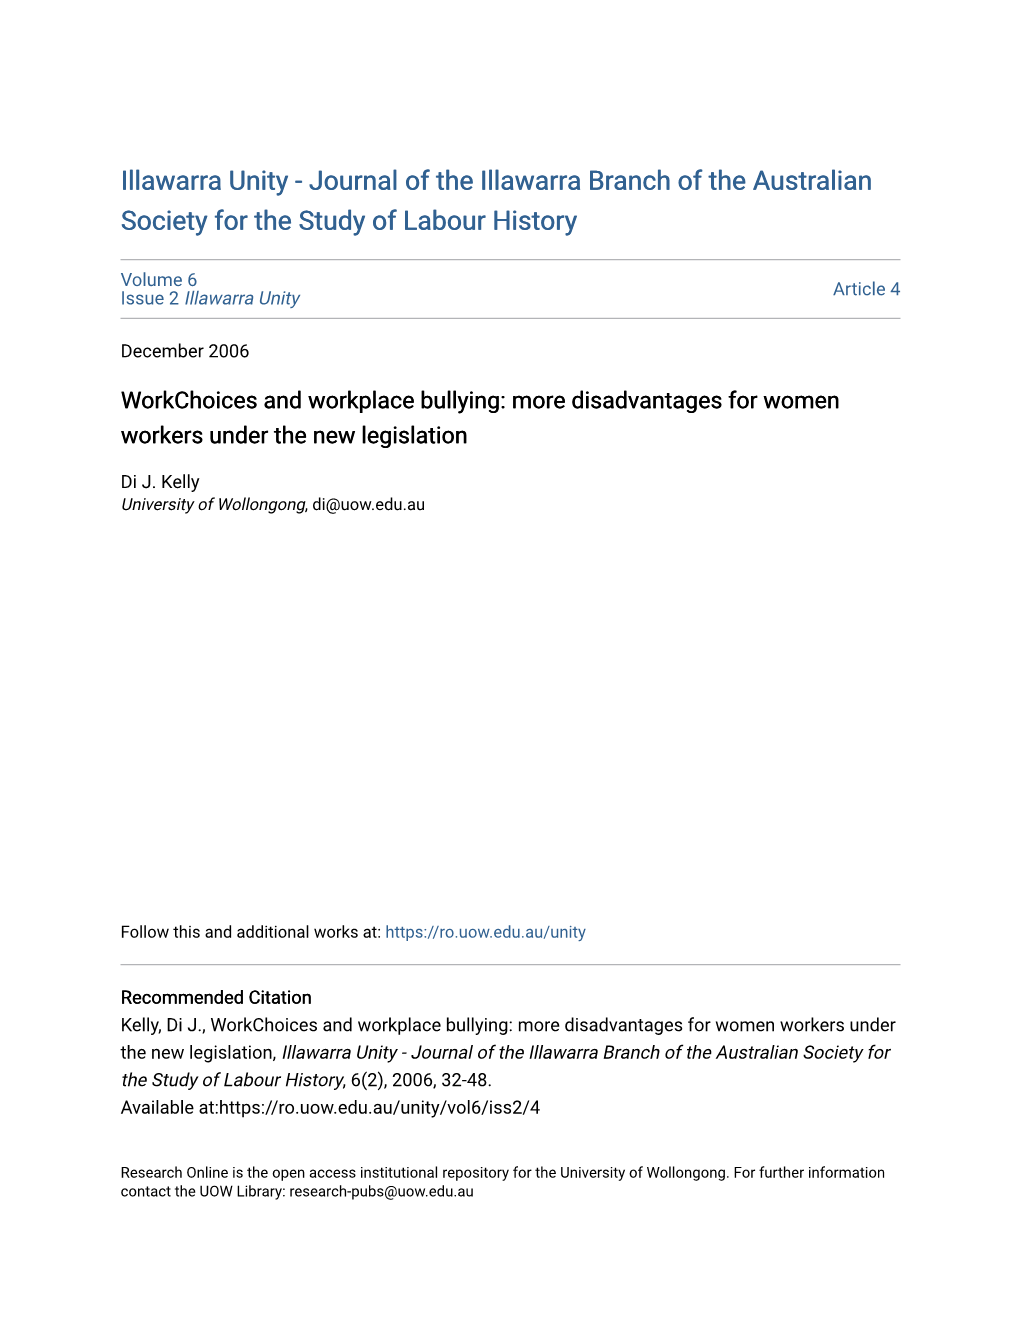 Workchoices and Workplace Bullying: More Disadvantages for Women Workers Under the New Legislation